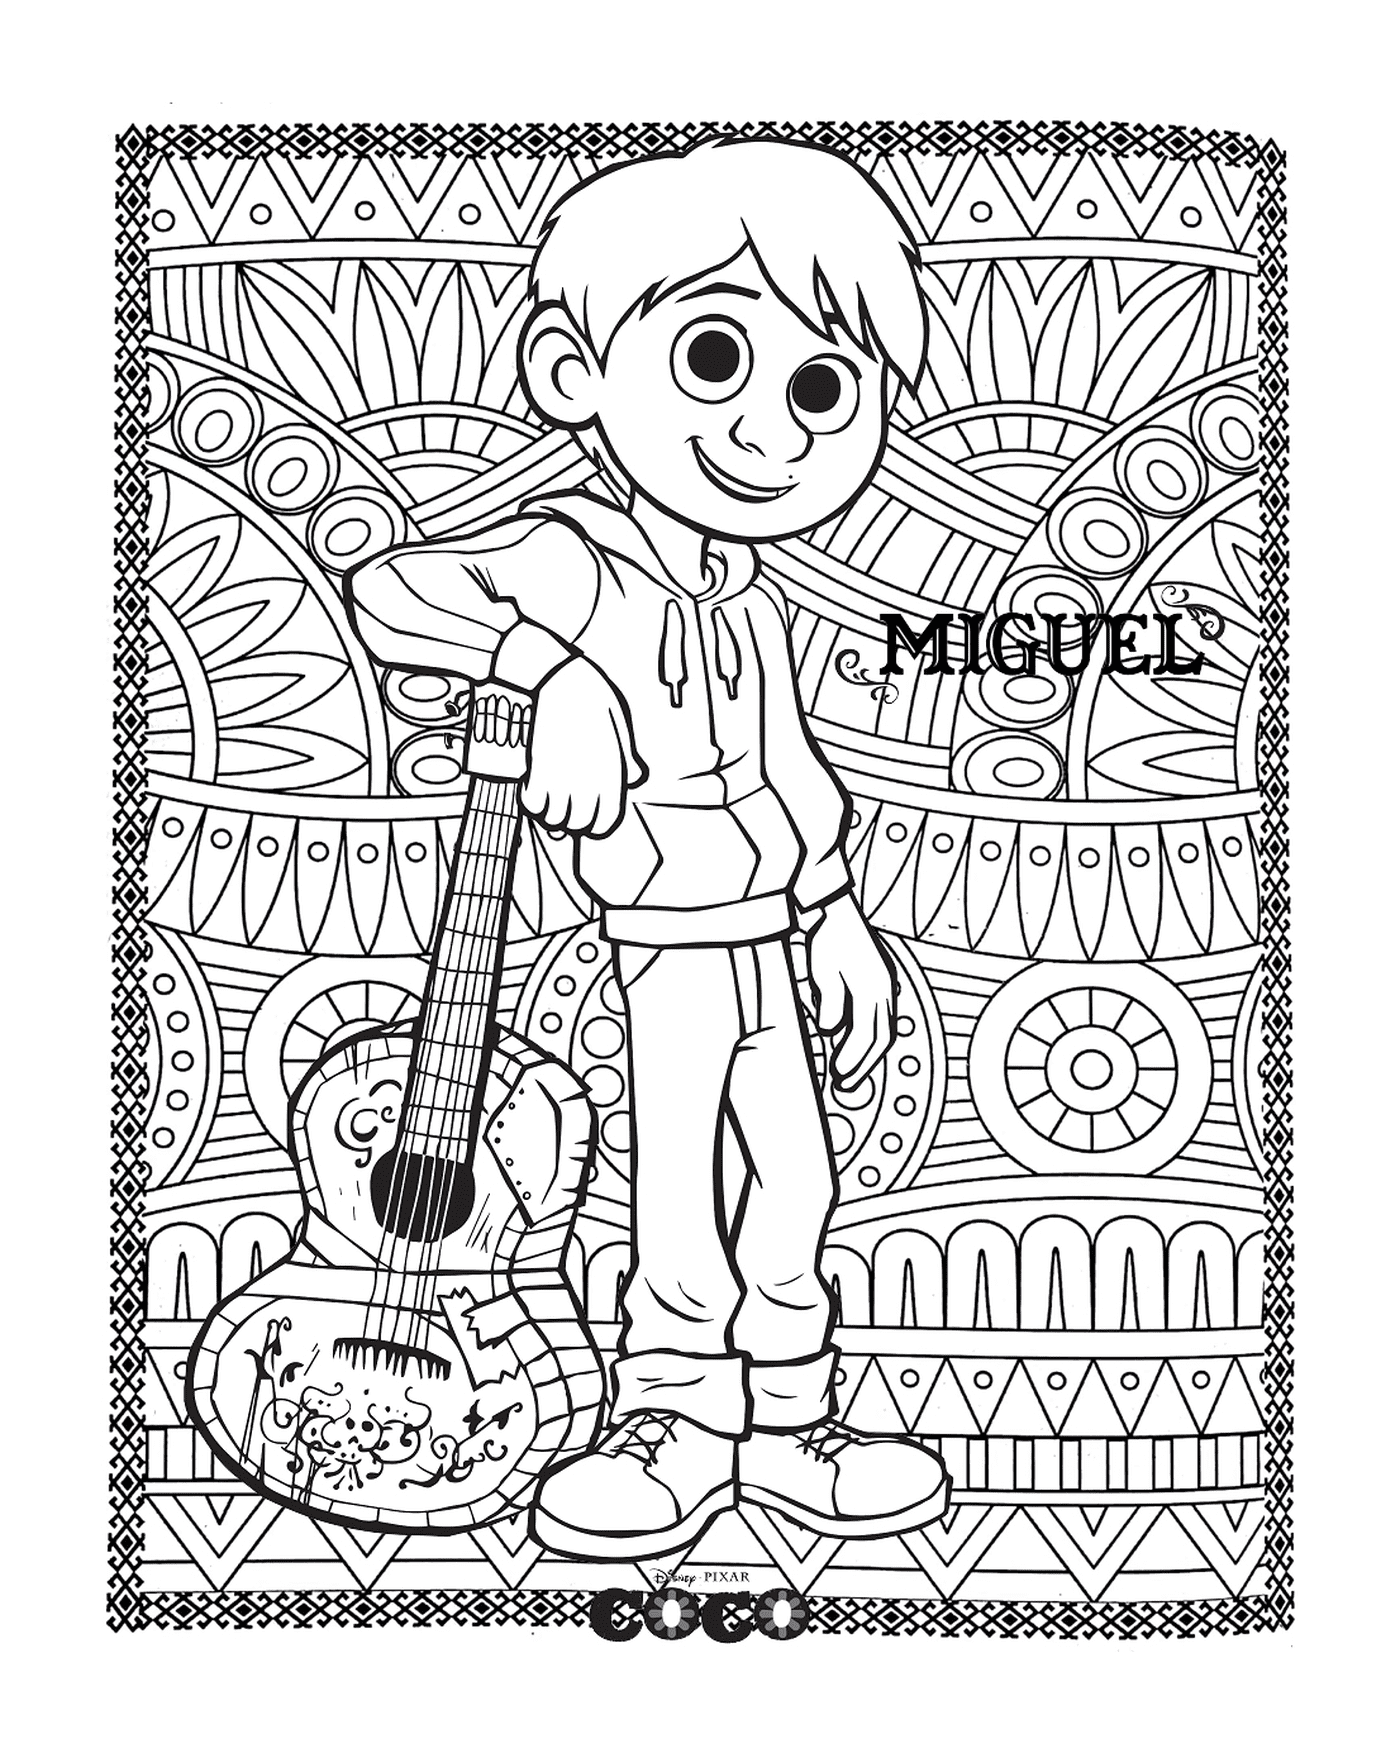  Coco, Miguel with mandala background for adults 